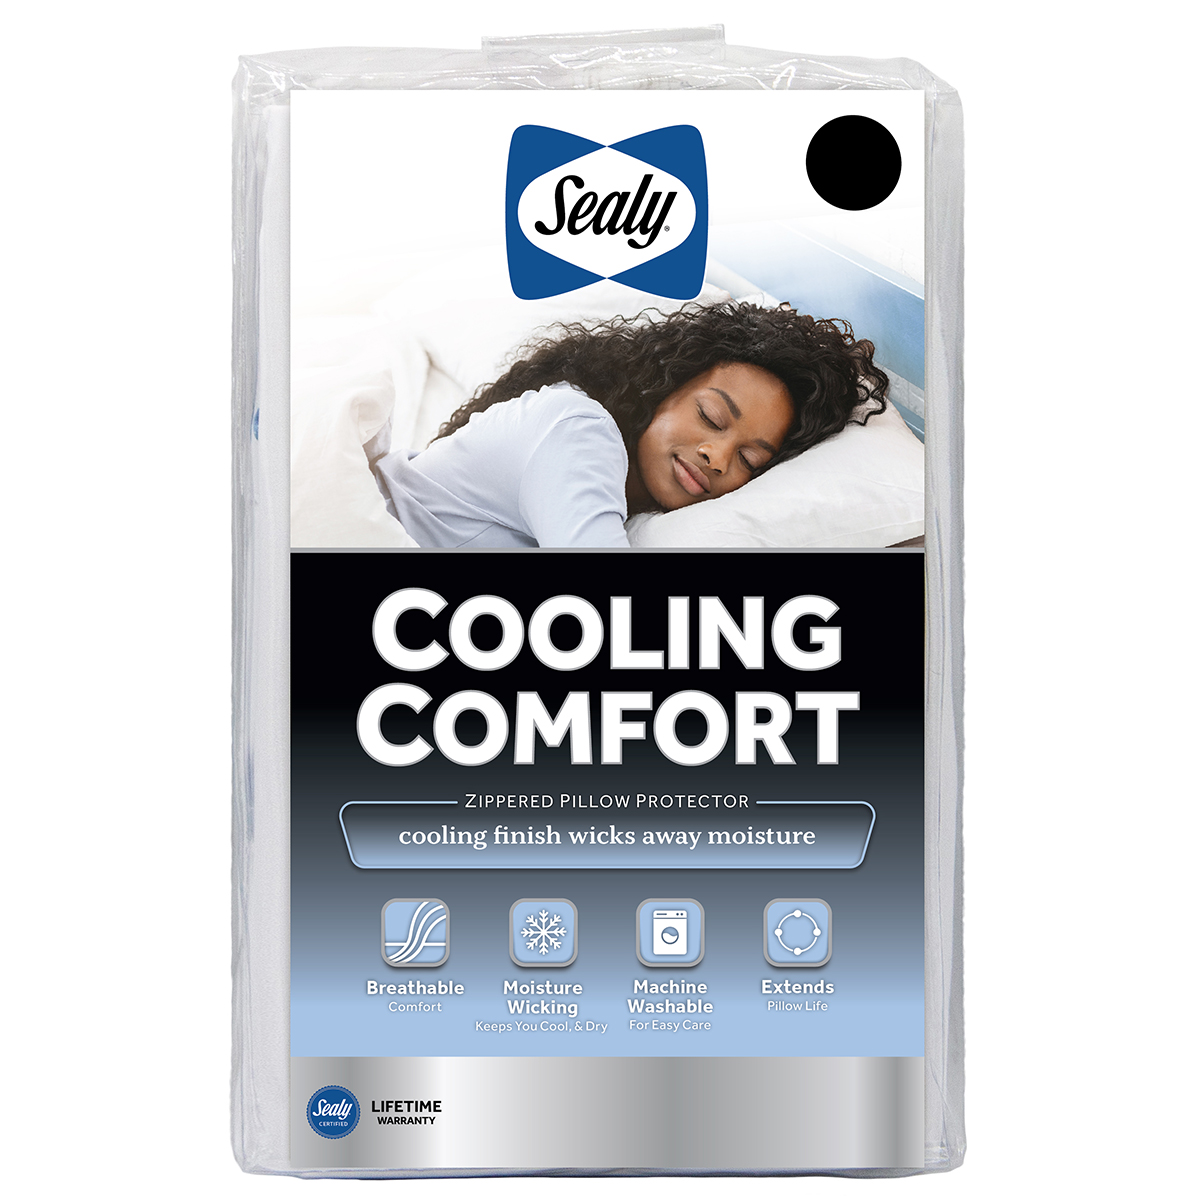 slide 1 of 17, Sealy Cooling Comfort Zippered Pillow Protector - White, 1 ct